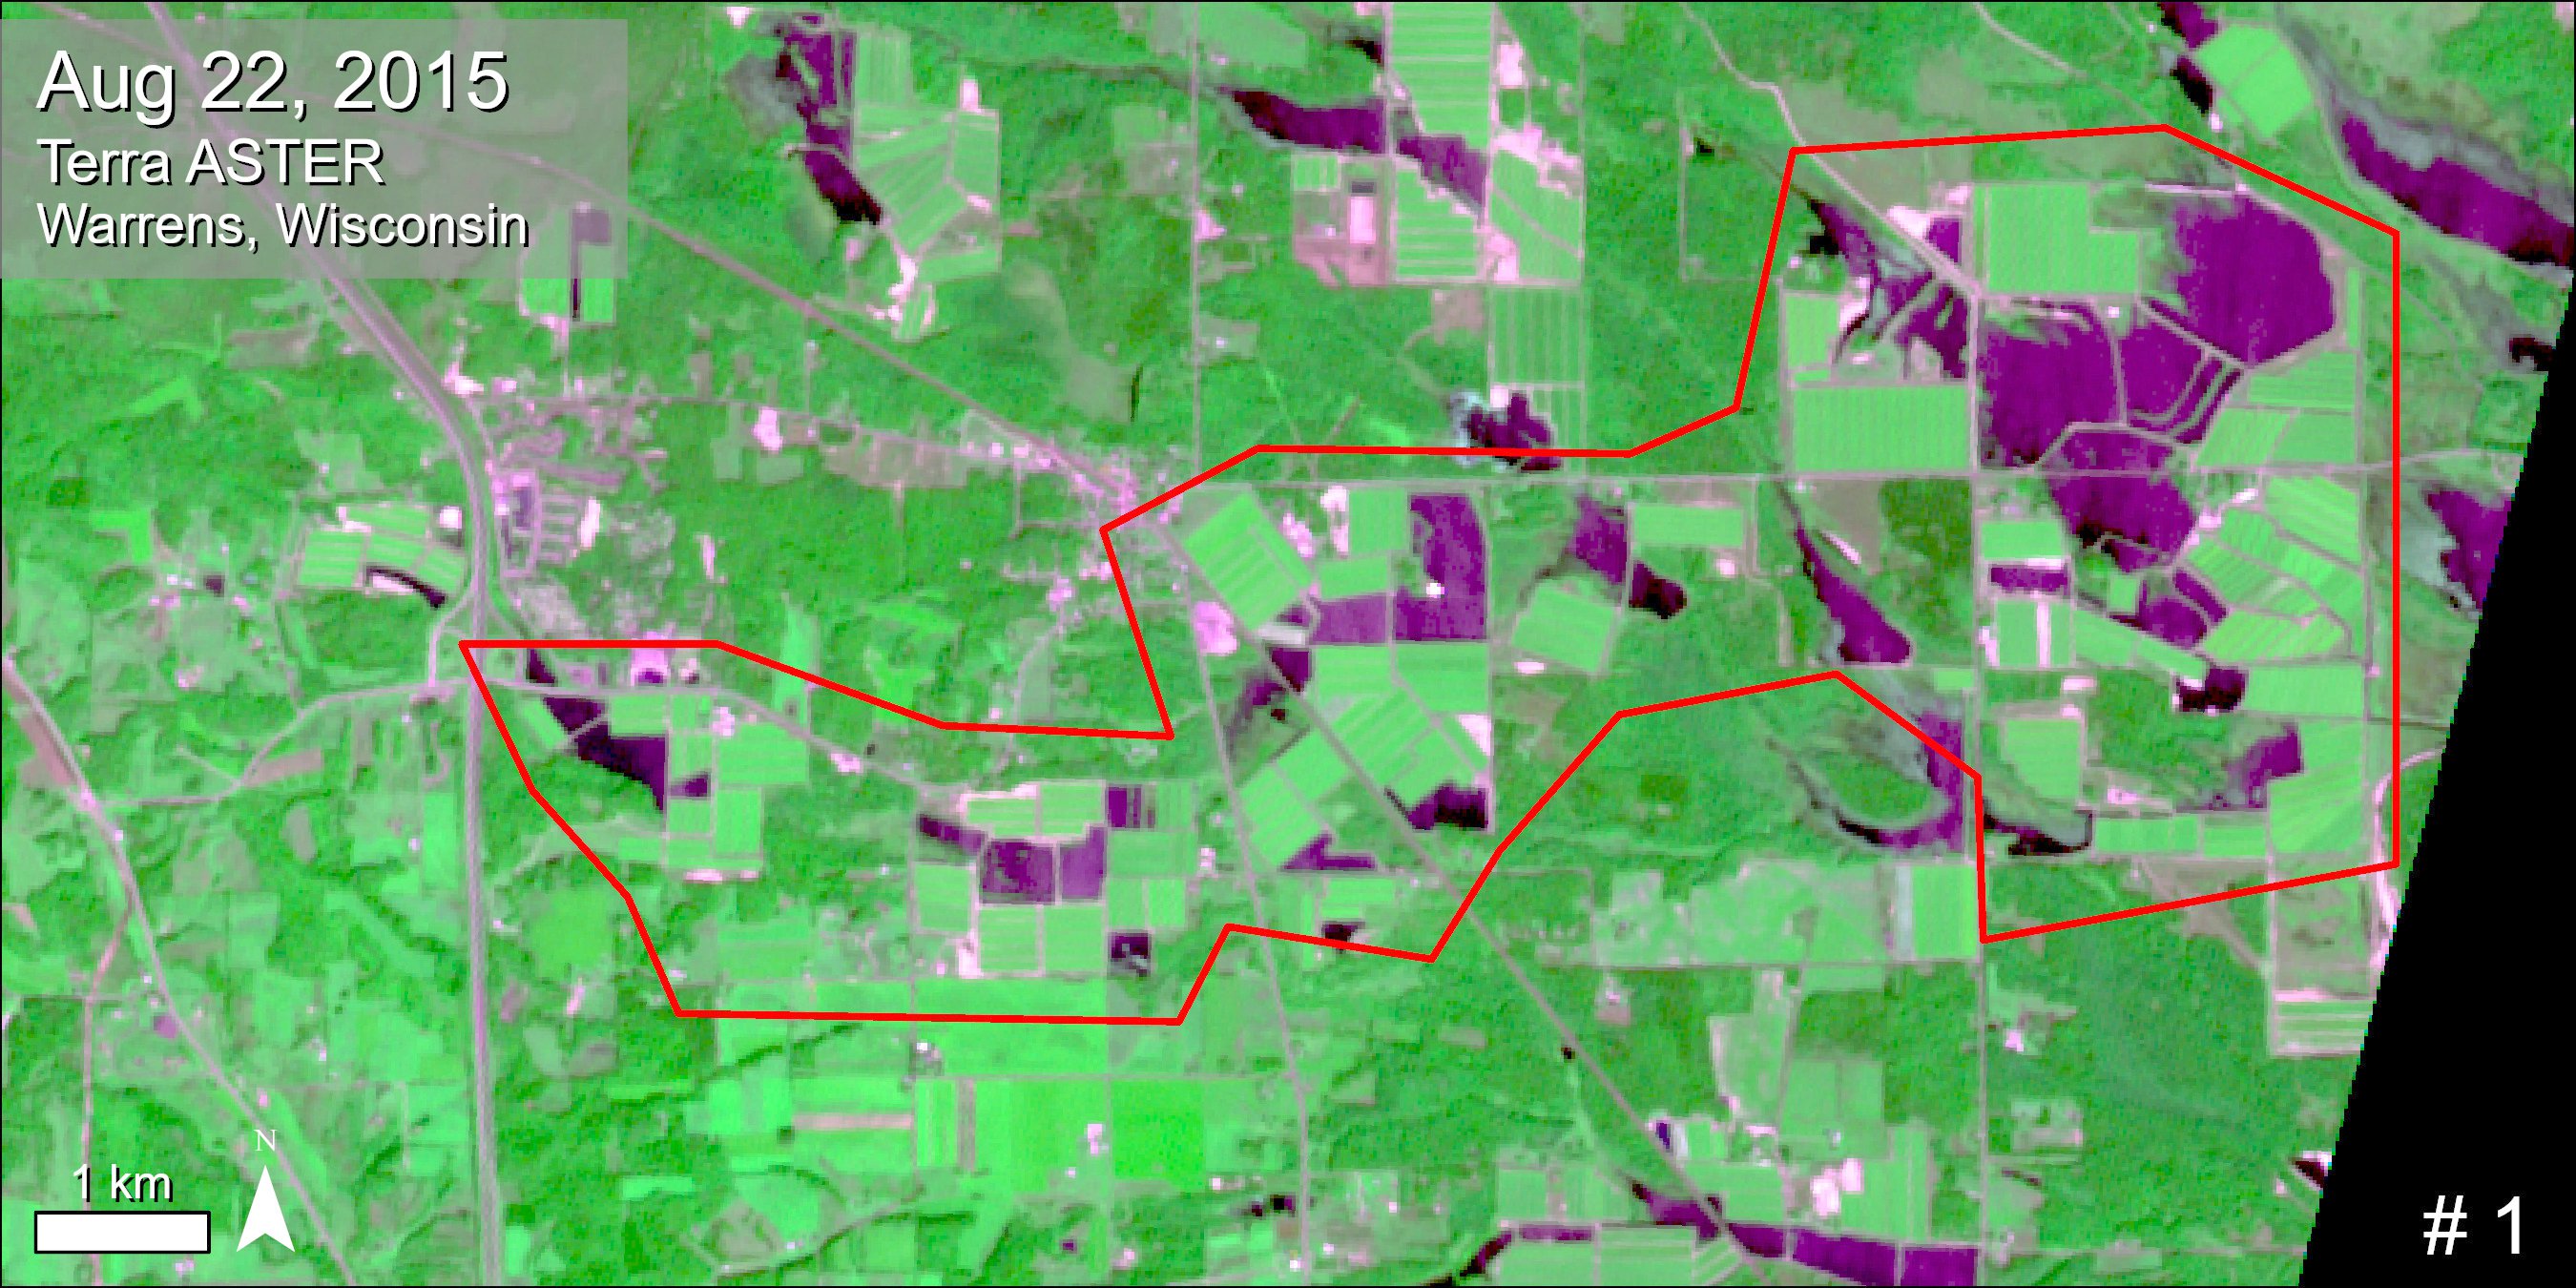 Terra ASTER imagery over marshes in Wisconsin.